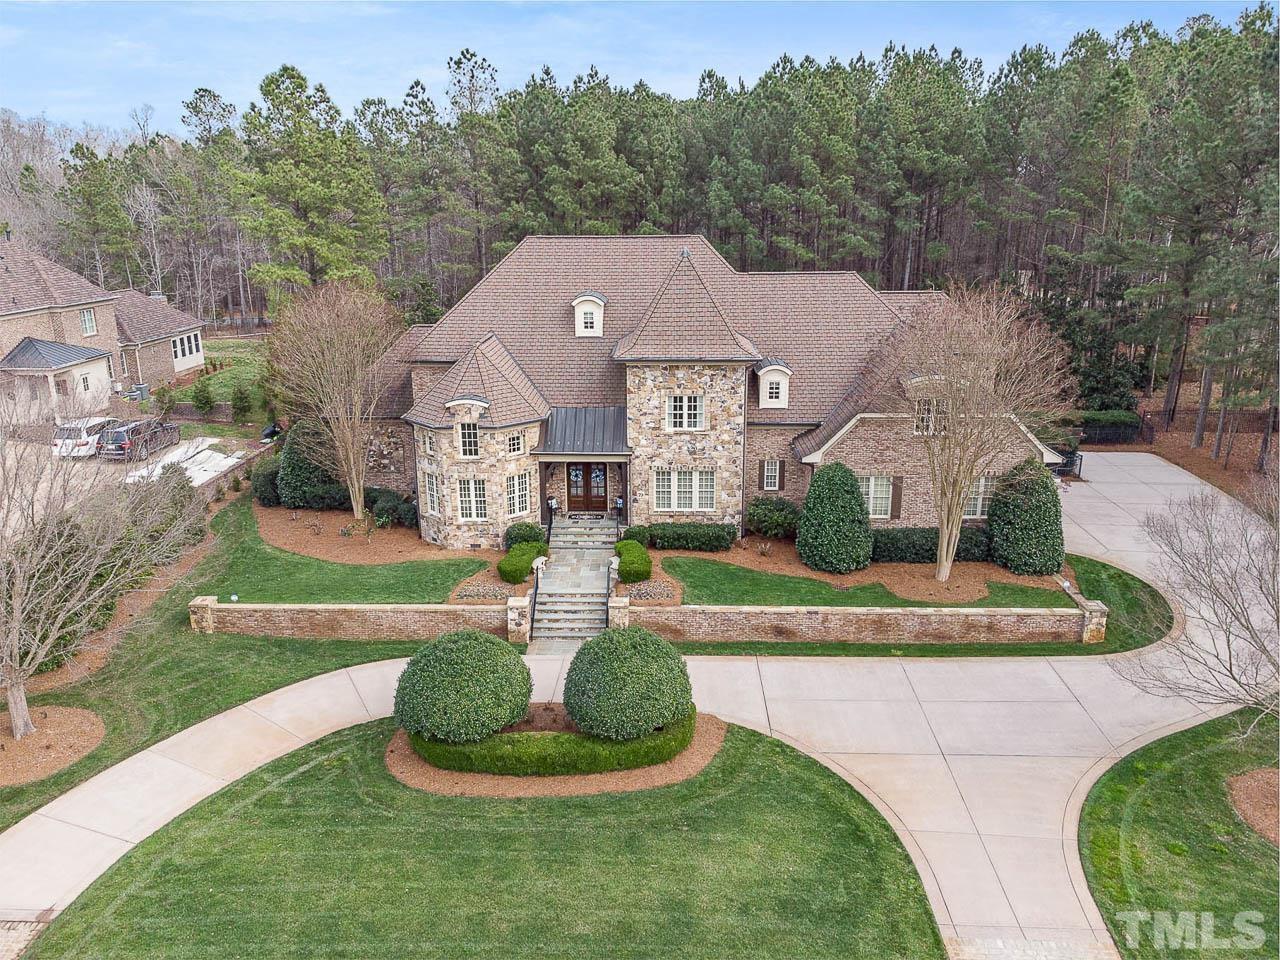 This lush landscaped property has a paved driveway with two entrances and a three car garage.